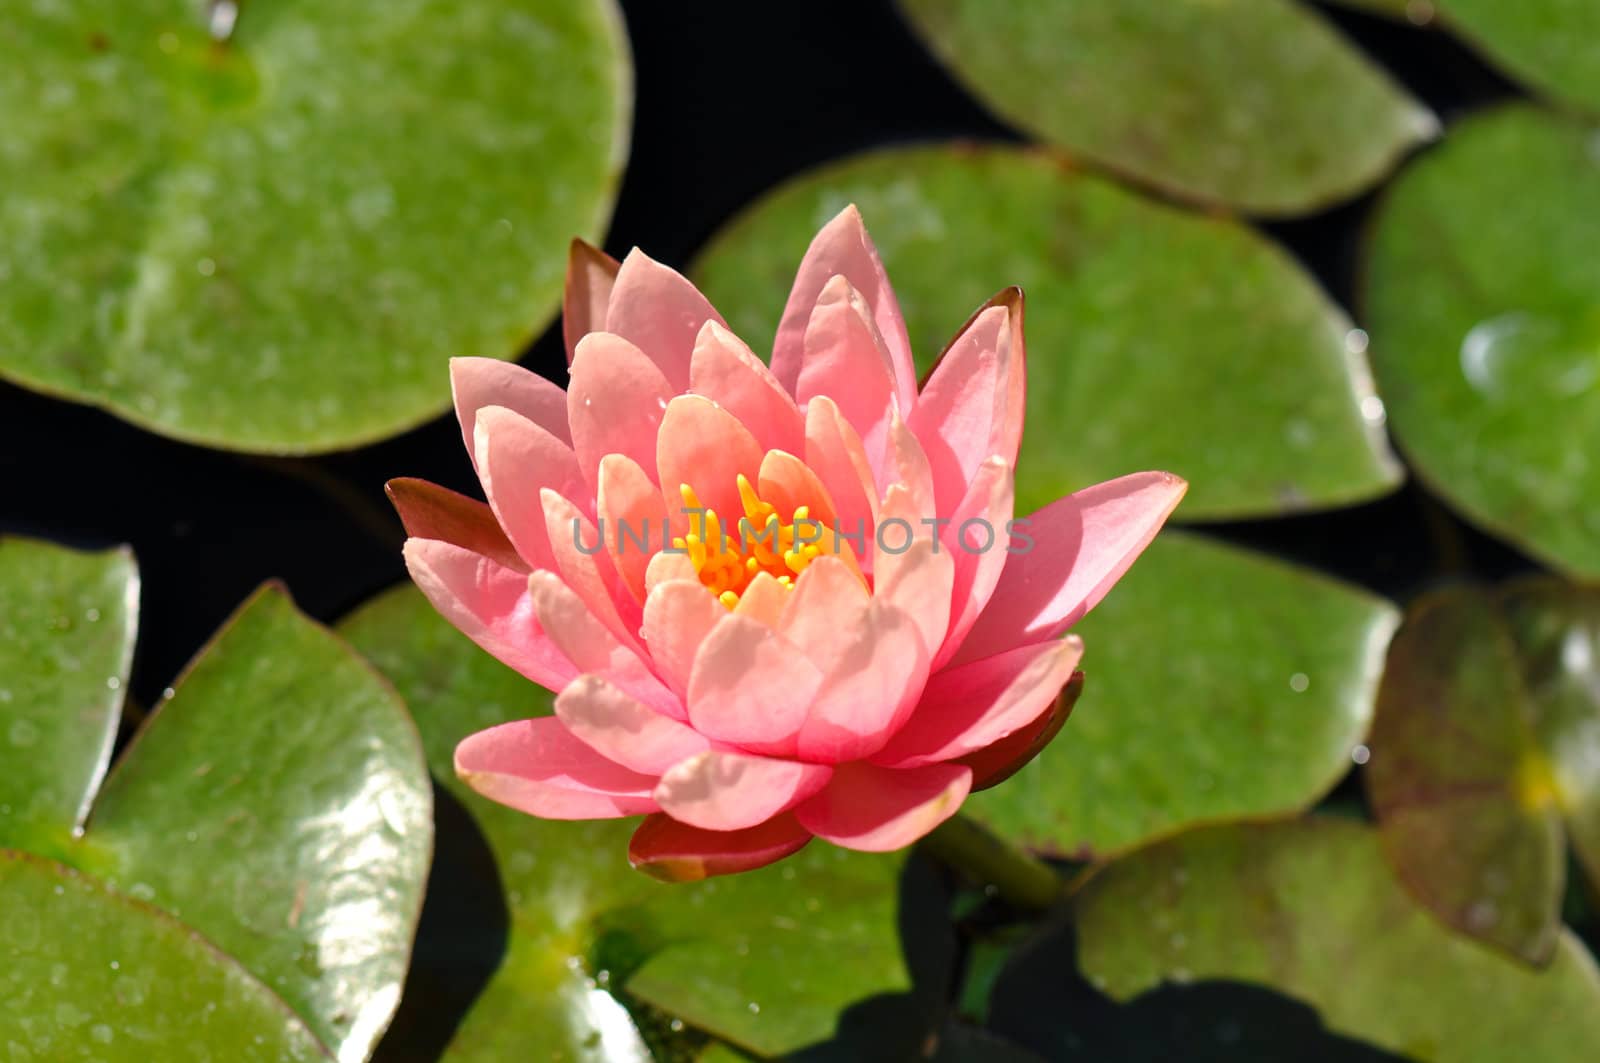 Pink Lotus Flower on Lilly Pad